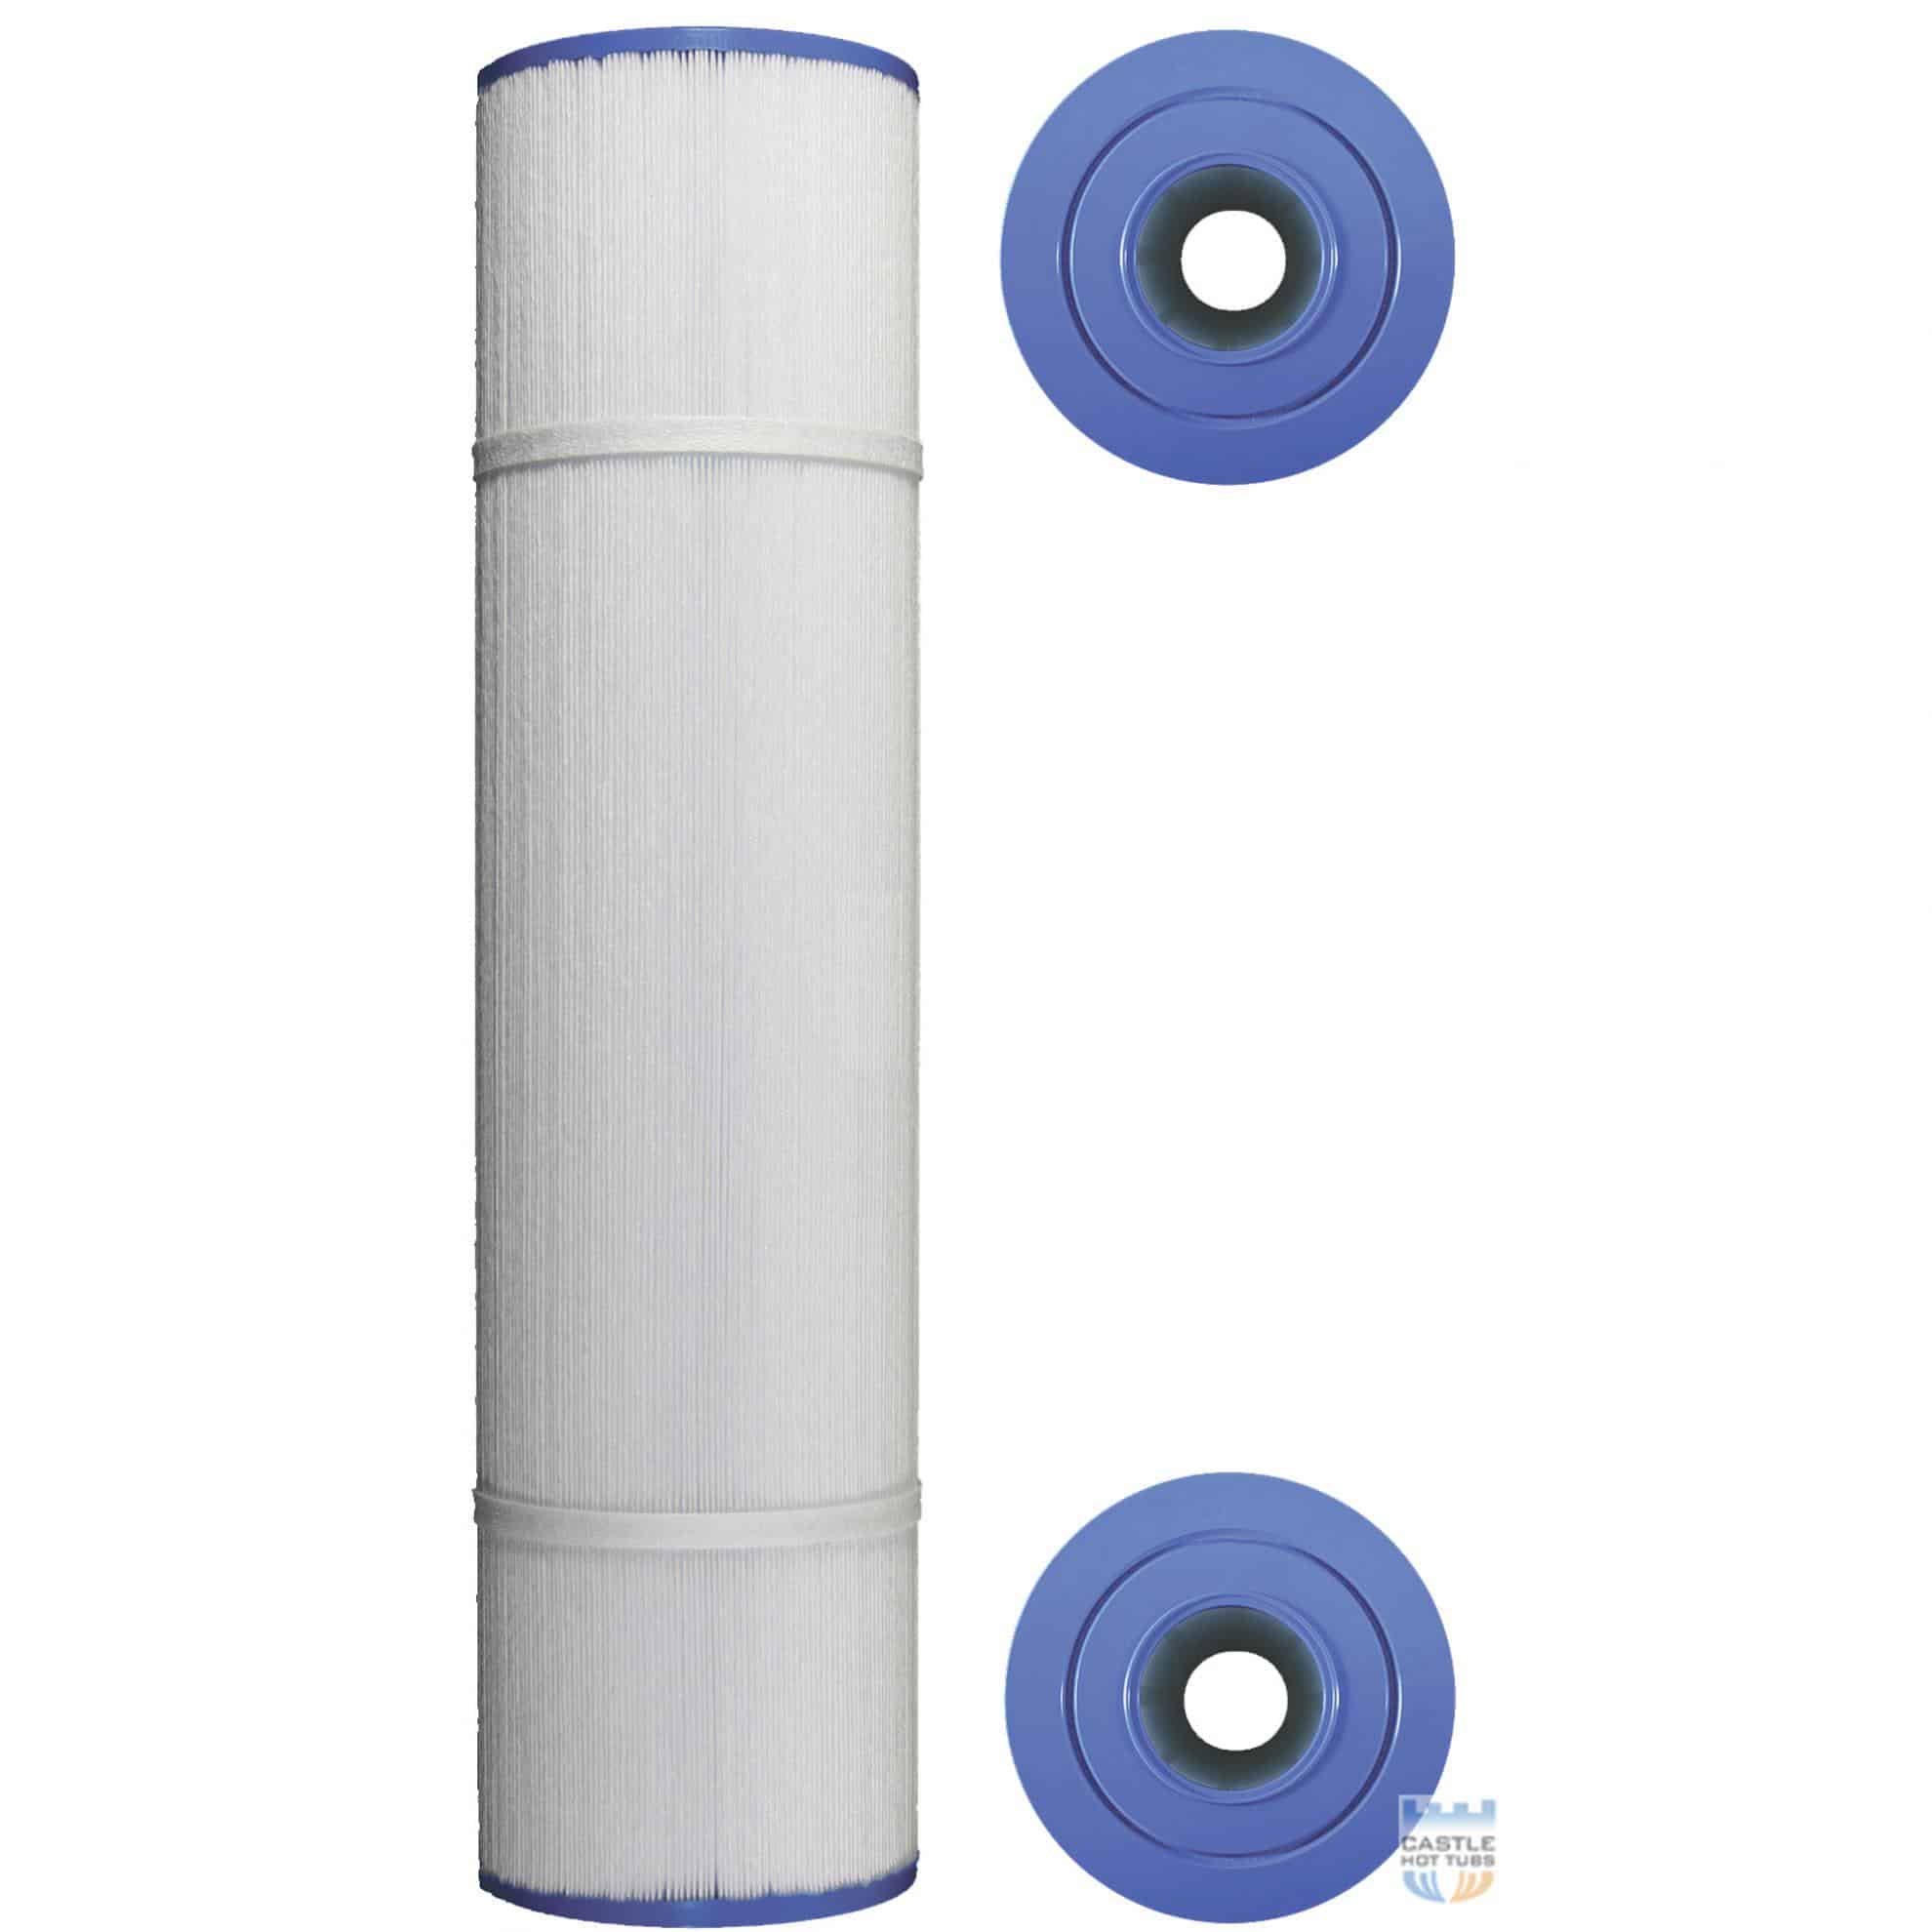 PCST80-M Replacement hot tub filter for FC-2975 51002 Coast Spas C5396 